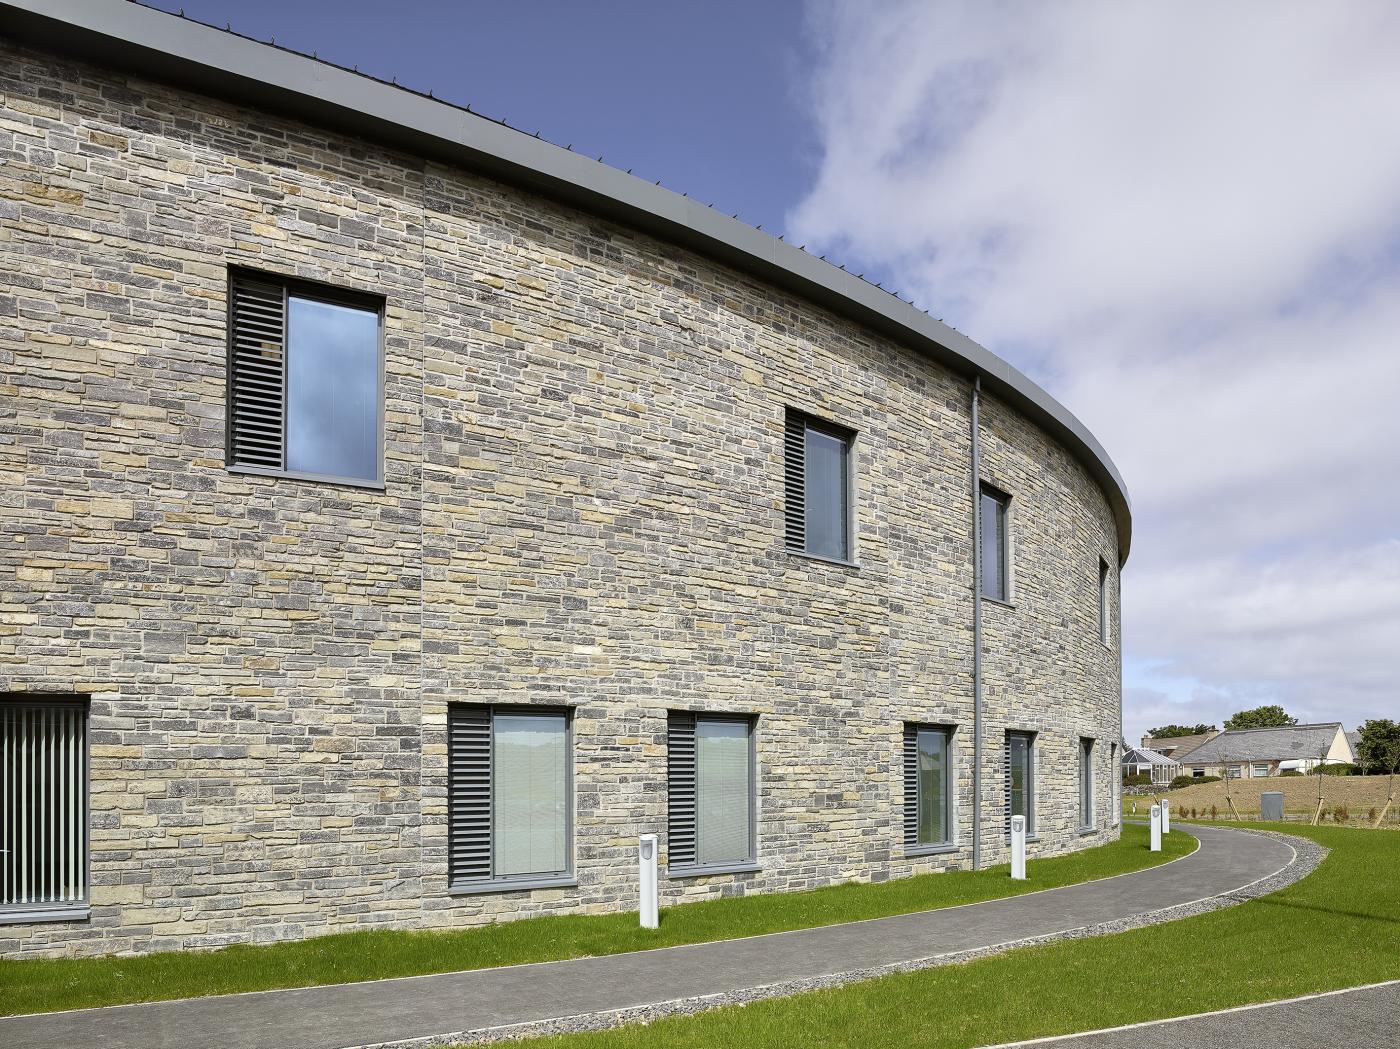  Consttruction of The Balfour, NHS Orkney Hospital and healthcare facility using local stone